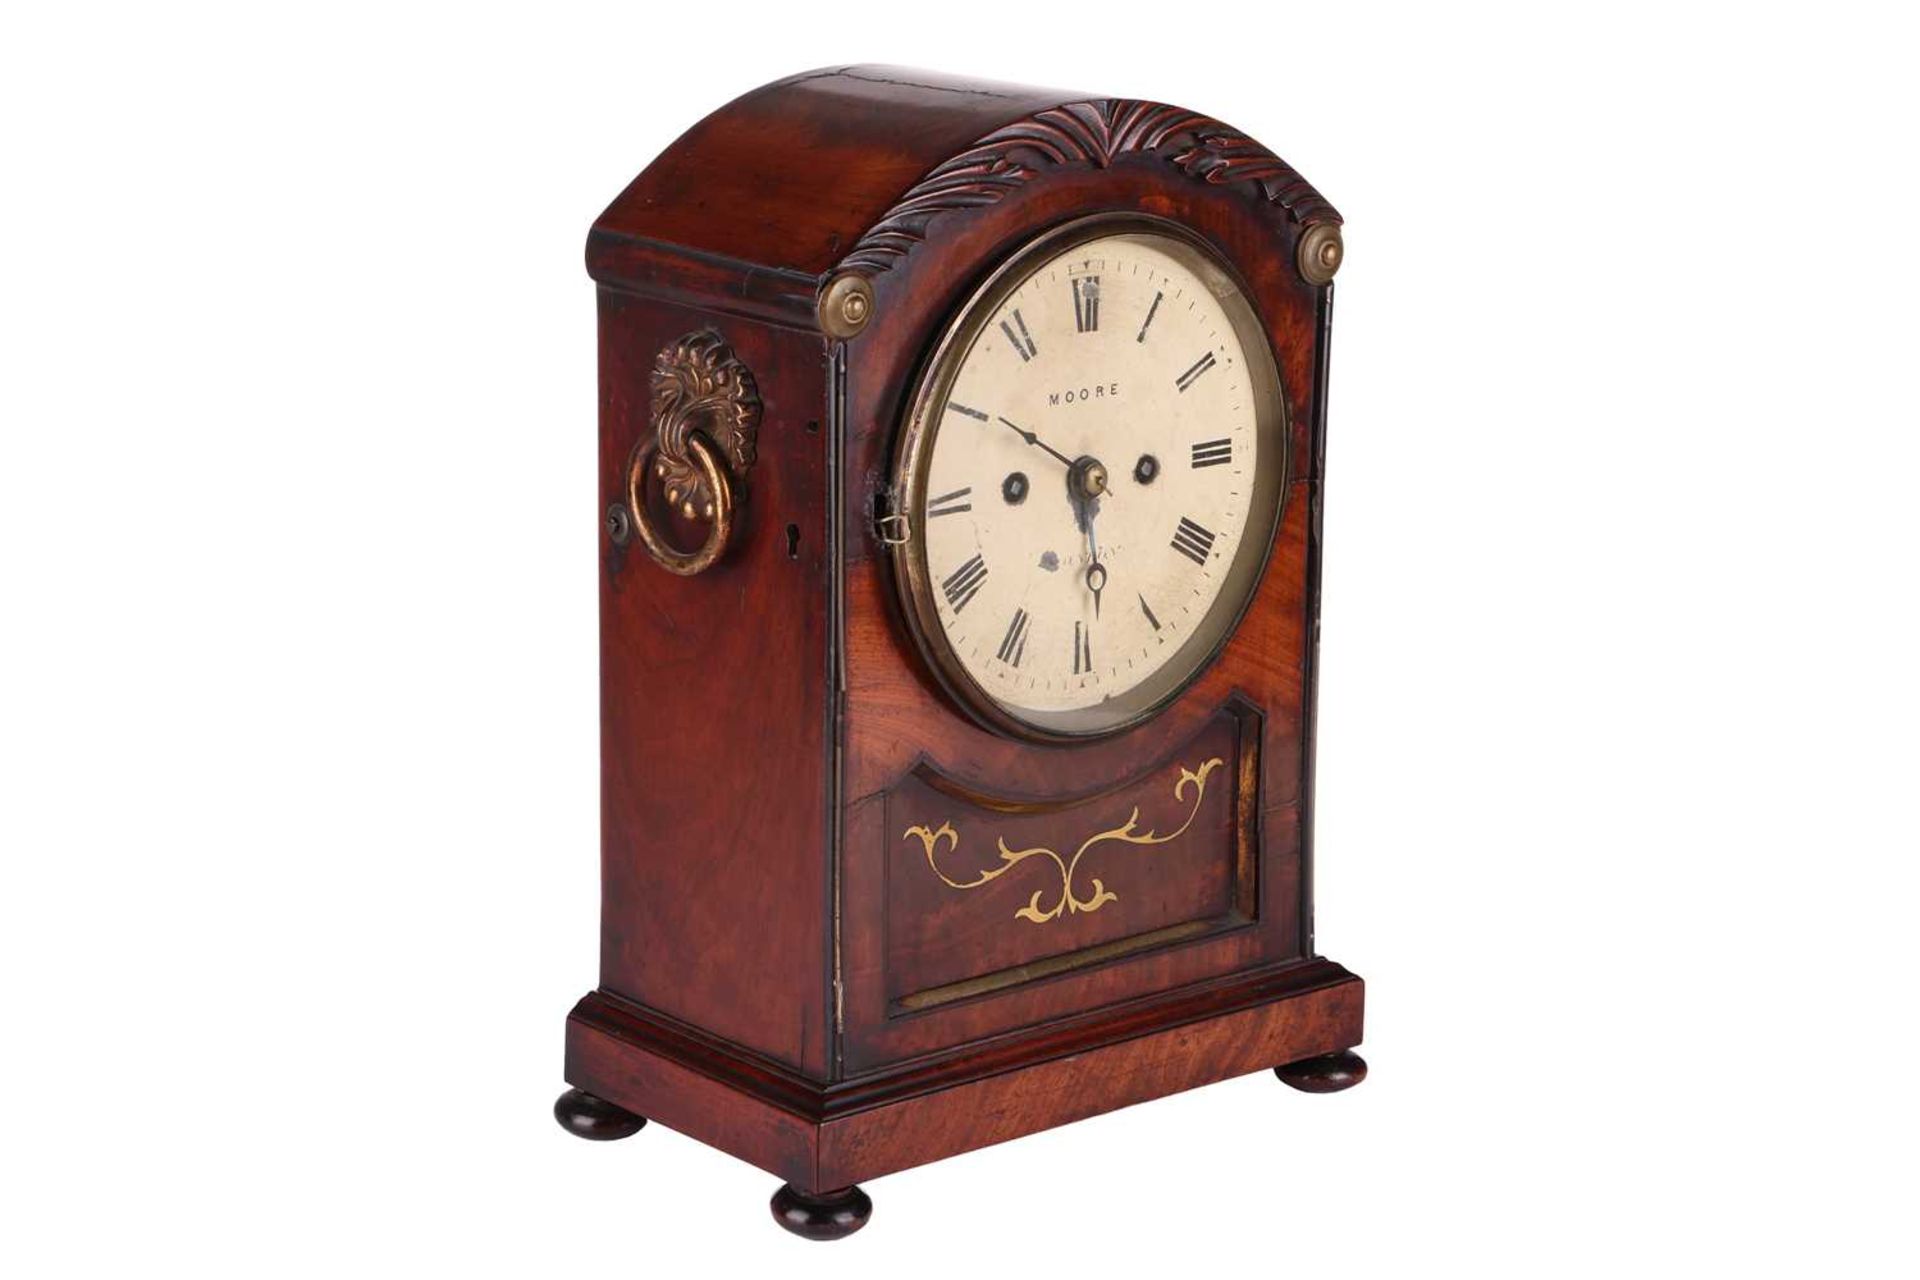 Moore of London a Regency mahogany 8-day twin fusee mantel clock case, with an arched top case and p - Image 2 of 7